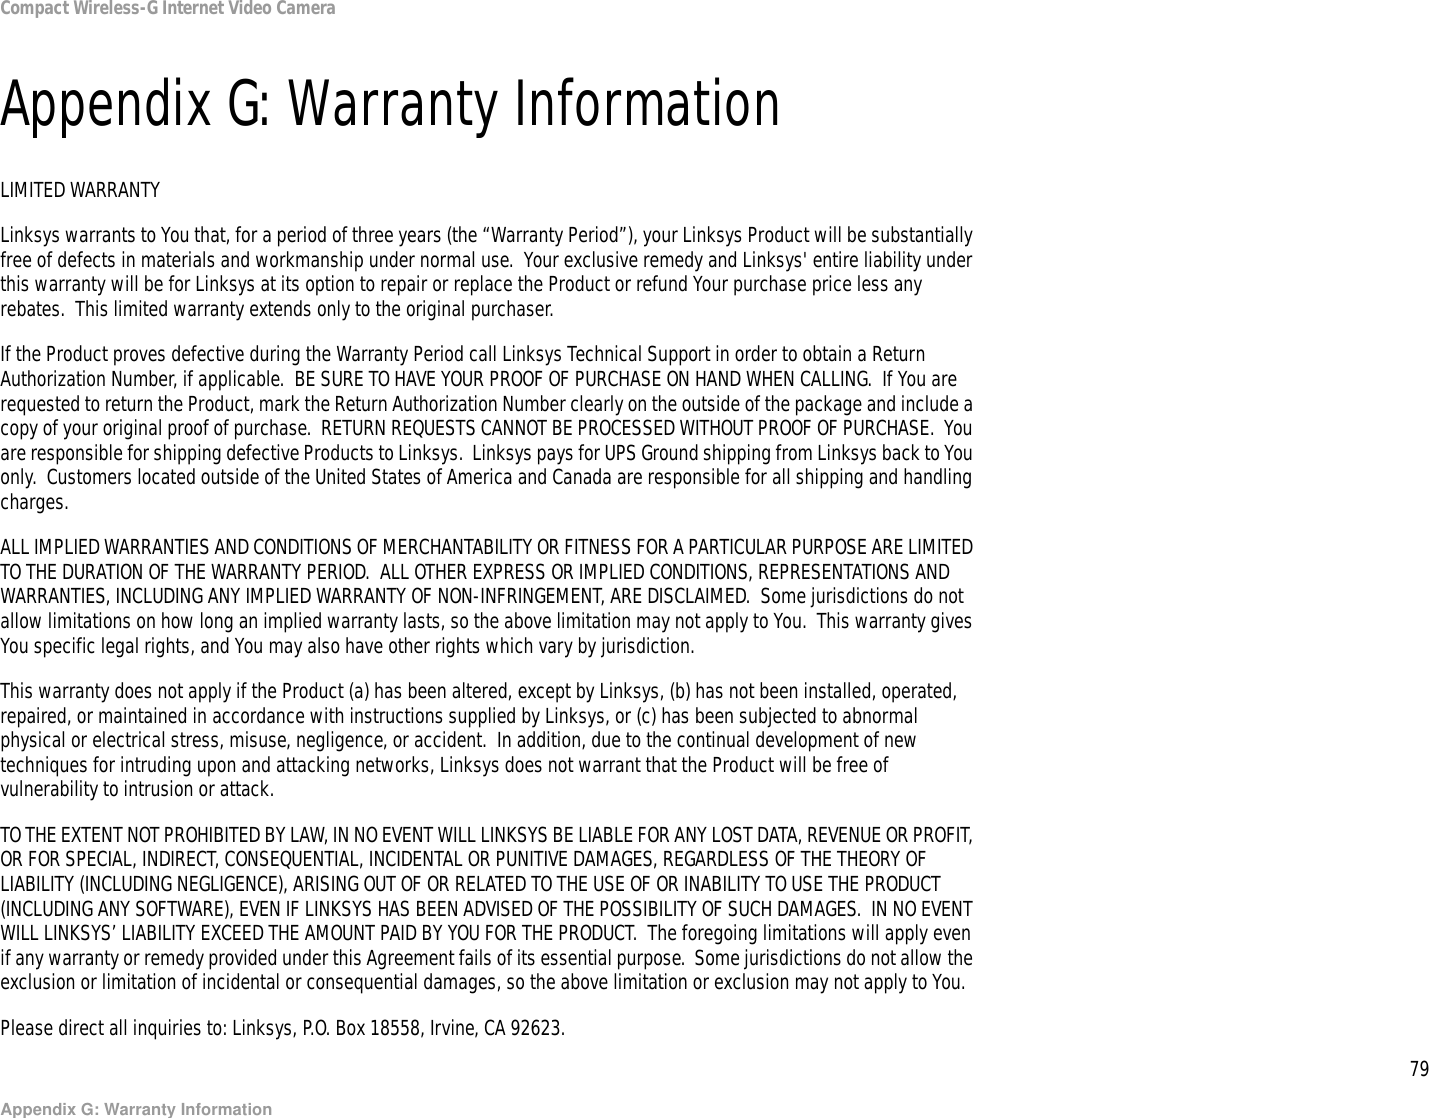 79Appendix G: Warranty InformationCompact Wireless-G Internet Video CameraAppendix G: Warranty InformationLIMITED WARRANTYLinksys warrants to You that, for a period of three years (the “Warranty Period”), your Linksys Product will be substantially free of defects in materials and workmanship under normal use.  Your exclusive remedy and Linksys&apos; entire liability under this warranty will be for Linksys at its option to repair or replace the Product or refund Your purchase price less any rebates.  This limited warranty extends only to the original purchaser.  If the Product proves defective during the Warranty Period call Linksys Technical Support in order to obtain a Return Authorization Number, if applicable.  BE SURE TO HAVE YOUR PROOF OF PURCHASE ON HAND WHEN CALLING.  If You are requested to return the Product, mark the Return Authorization Number clearly on the outside of the package and include a copy of your original proof of purchase.  RETURN REQUESTS CANNOT BE PROCESSED WITHOUT PROOF OF PURCHASE.  You are responsible for shipping defective Products to Linksys.  Linksys pays for UPS Ground shipping from Linksys back to You only.  Customers located outside of the United States of America and Canada are responsible for all shipping and handling charges. ALL IMPLIED WARRANTIES AND CONDITIONS OF MERCHANTABILITY OR FITNESS FOR A PARTICULAR PURPOSE ARE LIMITED TO THE DURATION OF THE WARRANTY PERIOD.  ALL OTHER EXPRESS OR IMPLIED CONDITIONS, REPRESENTATIONS AND WARRANTIES, INCLUDING ANY IMPLIED WARRANTY OF NON-INFRINGEMENT, ARE DISCLAIMED.  Some jurisdictions do not allow limitations on how long an implied warranty lasts, so the above limitation may not apply to You.  This warranty gives You specific legal rights, and You may also have other rights which vary by jurisdiction.This warranty does not apply if the Product (a) has been altered, except by Linksys, (b) has not been installed, operated, repaired, or maintained in accordance with instructions supplied by Linksys, or (c) has been subjected to abnormal physical or electrical stress, misuse, negligence, or accident.  In addition, due to the continual development of new techniques for intruding upon and attacking networks, Linksys does not warrant that the Product will be free of vulnerability to intrusion or attack.TO THE EXTENT NOT PROHIBITED BY LAW, IN NO EVENT WILL LINKSYS BE LIABLE FOR ANY LOST DATA, REVENUE OR PROFIT, OR FOR SPECIAL, INDIRECT, CONSEQUENTIAL, INCIDENTAL OR PUNITIVE DAMAGES, REGARDLESS OF THE THEORY OF LIABILITY (INCLUDING NEGLIGENCE), ARISING OUT OF OR RELATED TO THE USE OF OR INABILITY TO USE THE PRODUCT (INCLUDING ANY SOFTWARE), EVEN IF LINKSYS HAS BEEN ADVISED OF THE POSSIBILITY OF SUCH DAMAGES.  IN NO EVENT WILL LINKSYS’ LIABILITY EXCEED THE AMOUNT PAID BY YOU FOR THE PRODUCT.  The foregoing limitations will apply even if any warranty or remedy provided under this Agreement fails of its essential purpose.  Some jurisdictions do not allow the exclusion or limitation of incidental or consequential damages, so the above limitation or exclusion may not apply to You.Please direct all inquiries to: Linksys, P.O. Box 18558, Irvine, CA 92623.